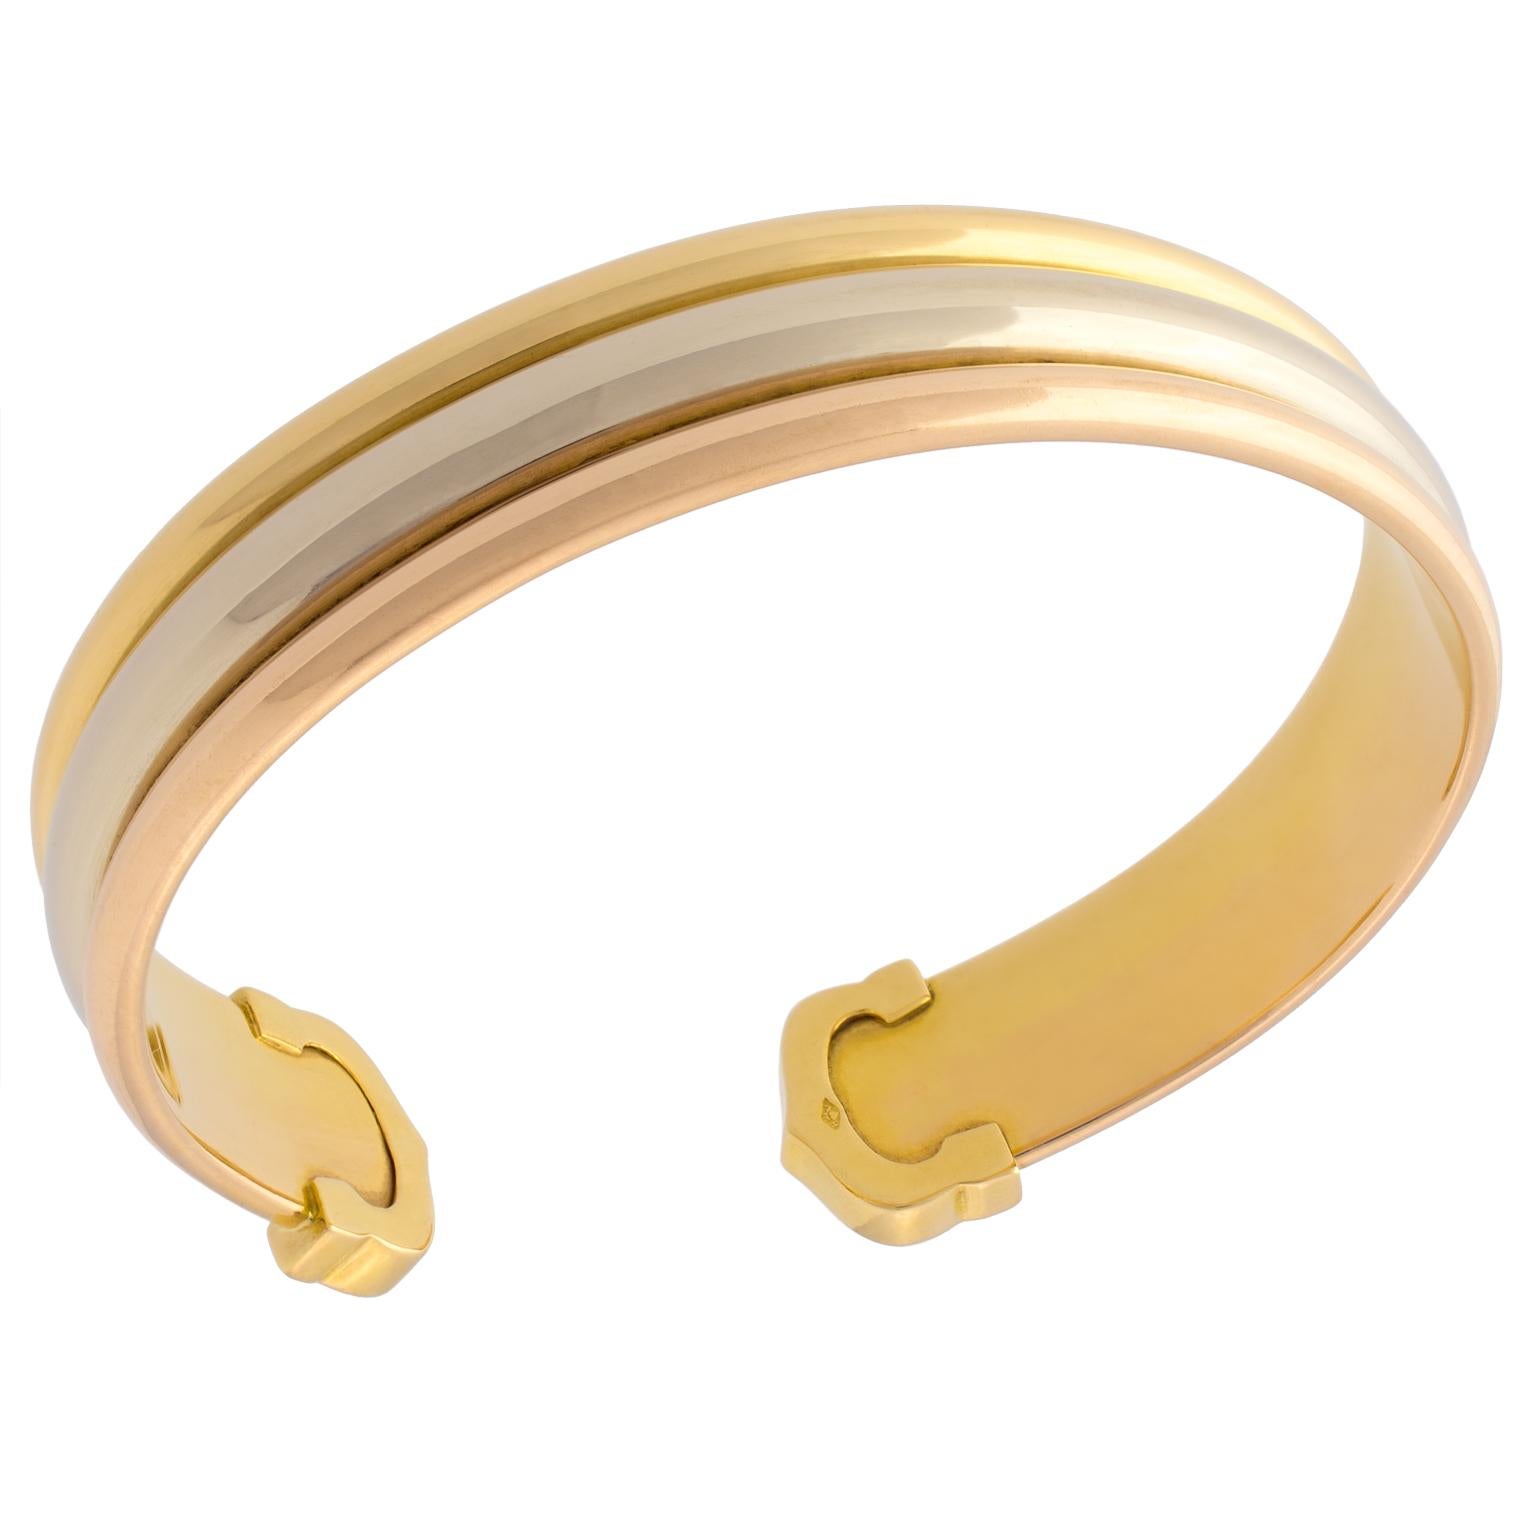 Cartier Trinity Trigold Double C cuff bracelet in white, yellow and rose gold.
Size 17